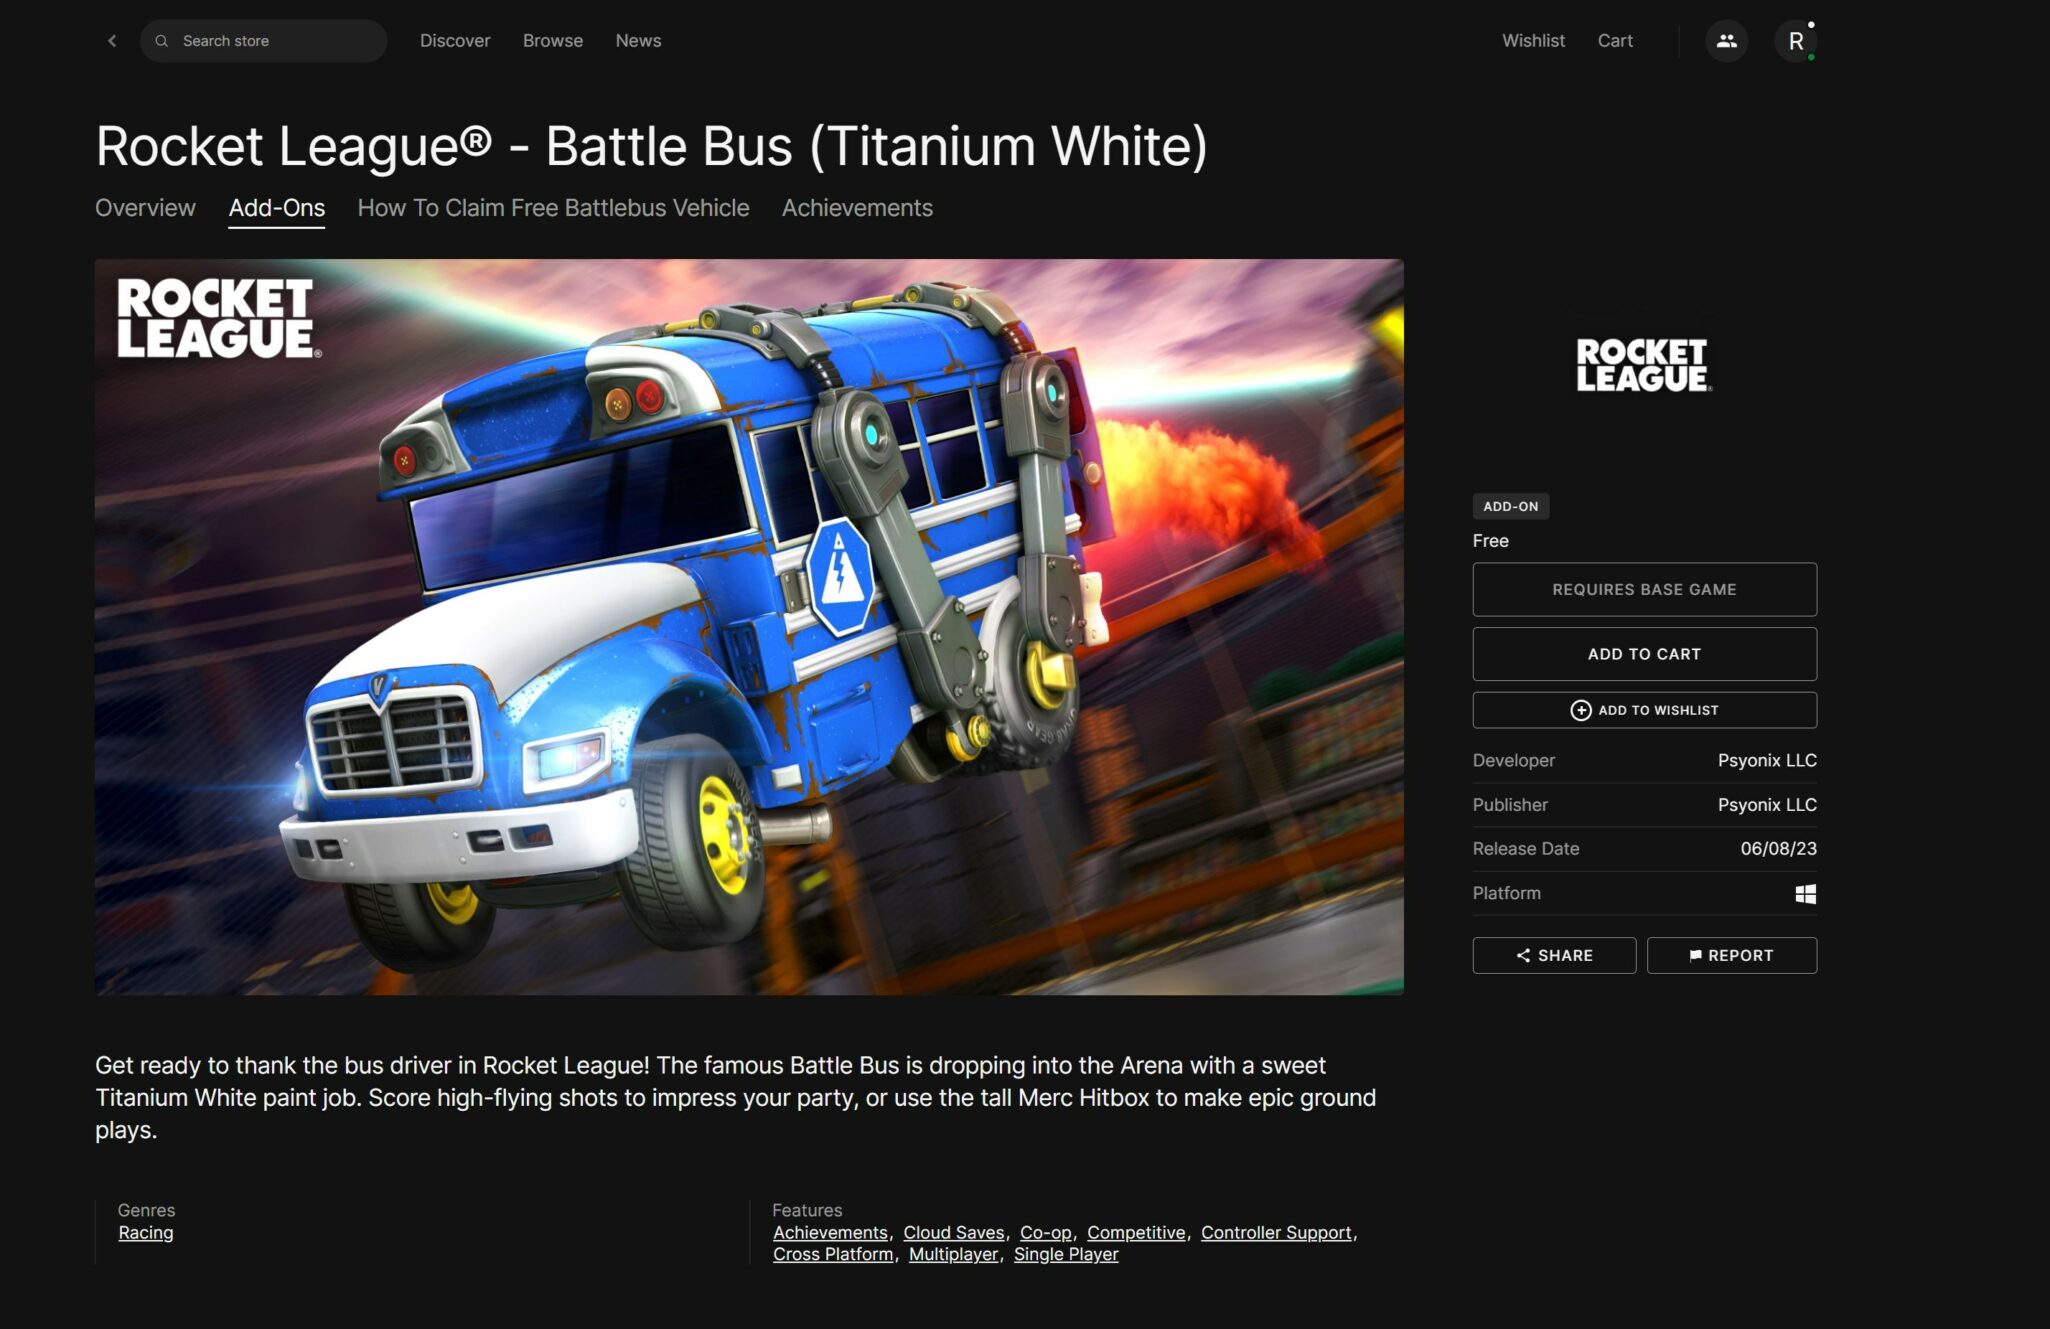 The Battle Bus Titanium White is a separate DLC that can be searched on the Epic Games Store.